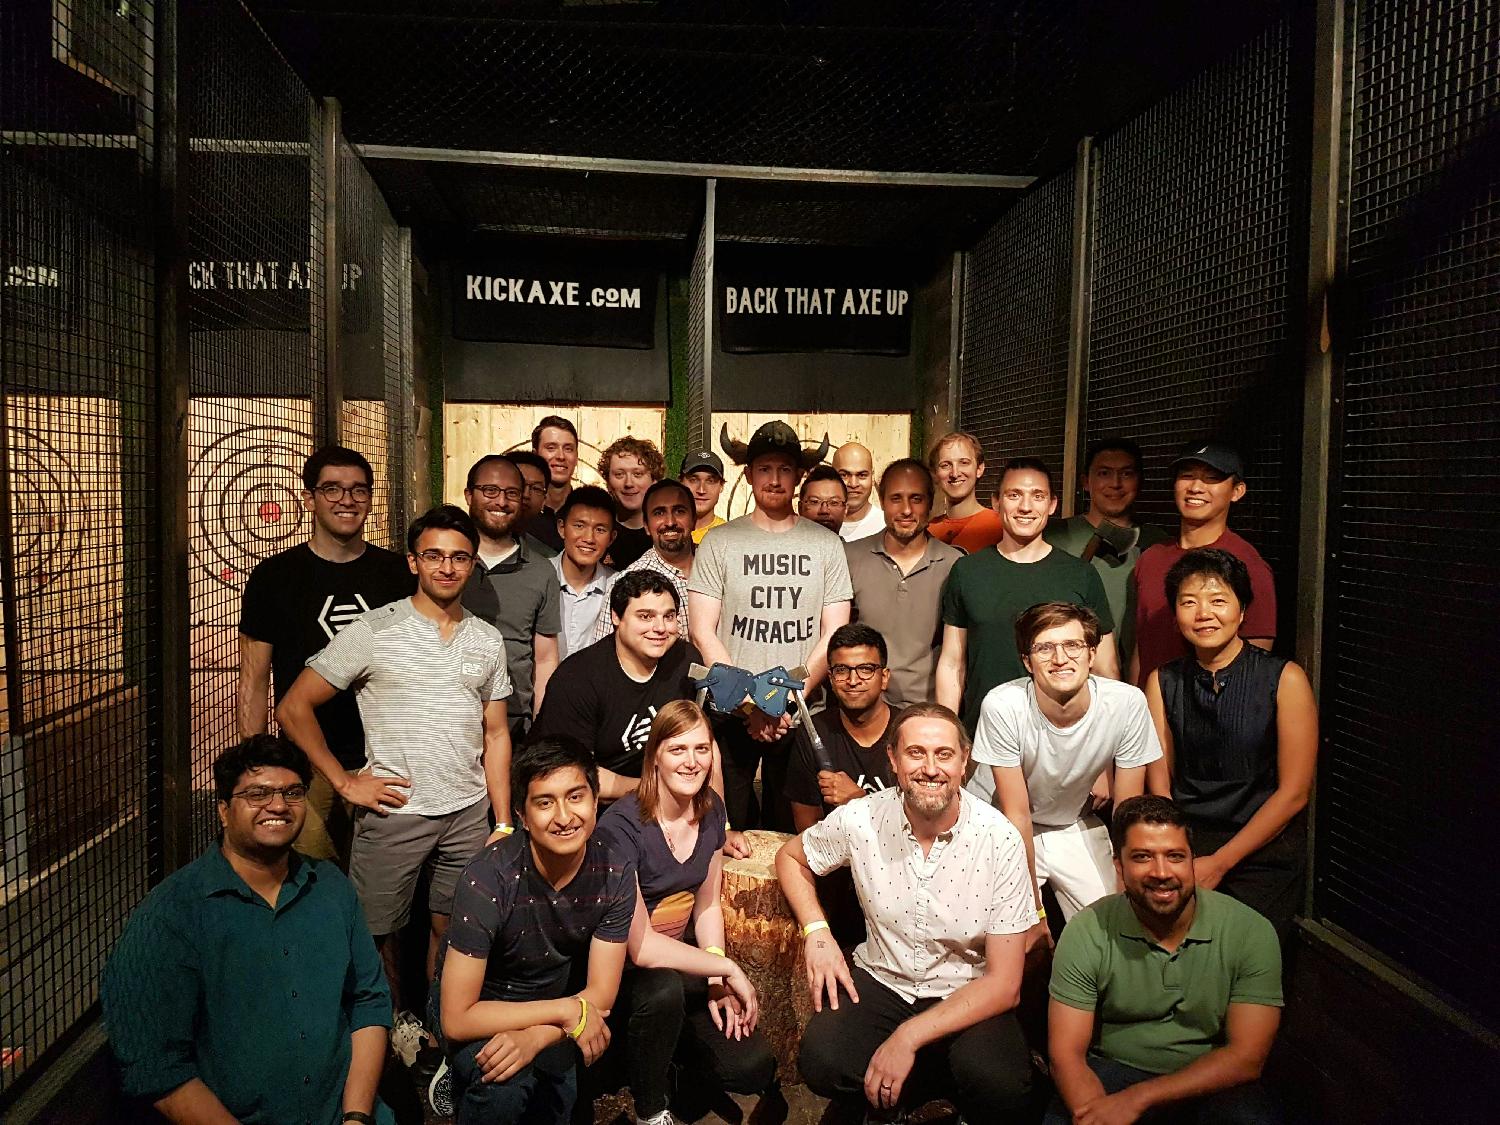 During Summer Swarm this year, our team of engineers tried their skills out with axe throwing!